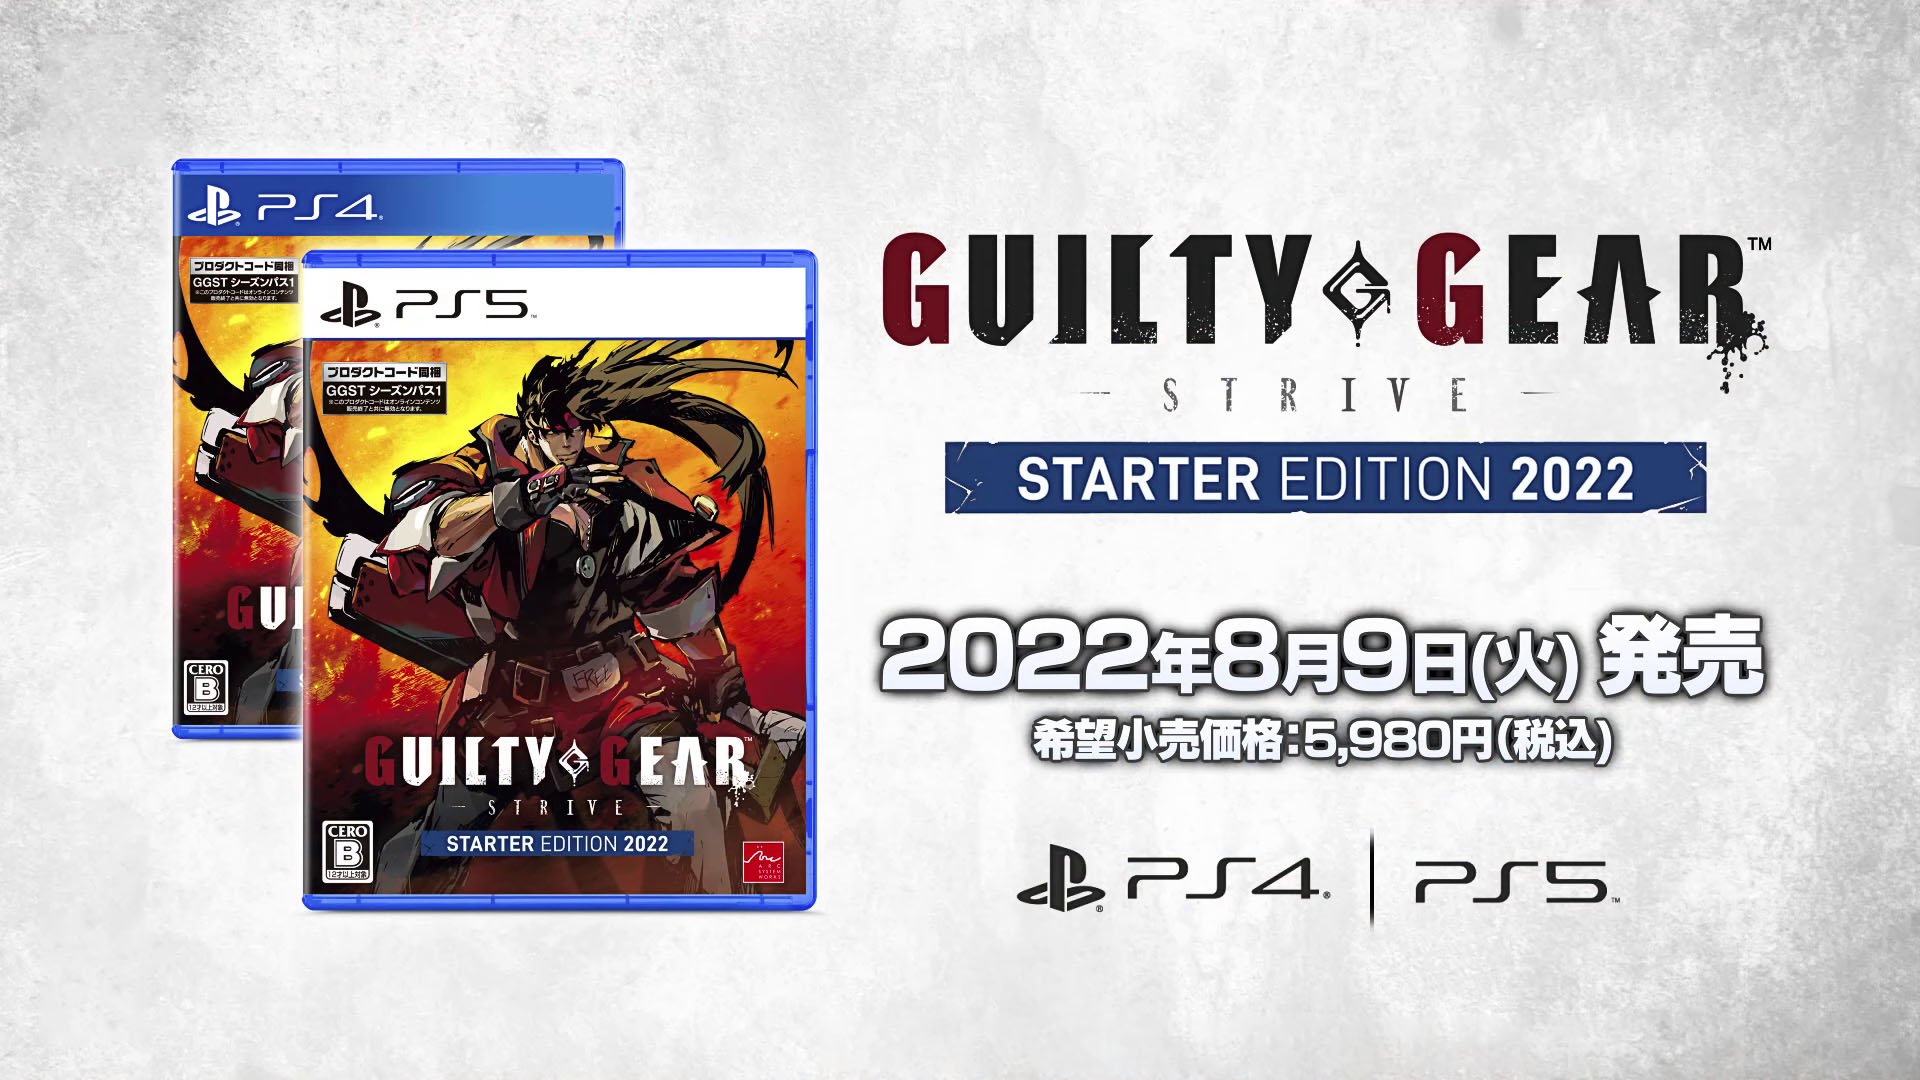 #
      Guilty Gear: Strive – Starter Edition 2022, large-scale balance update, and cross-play beta test announced